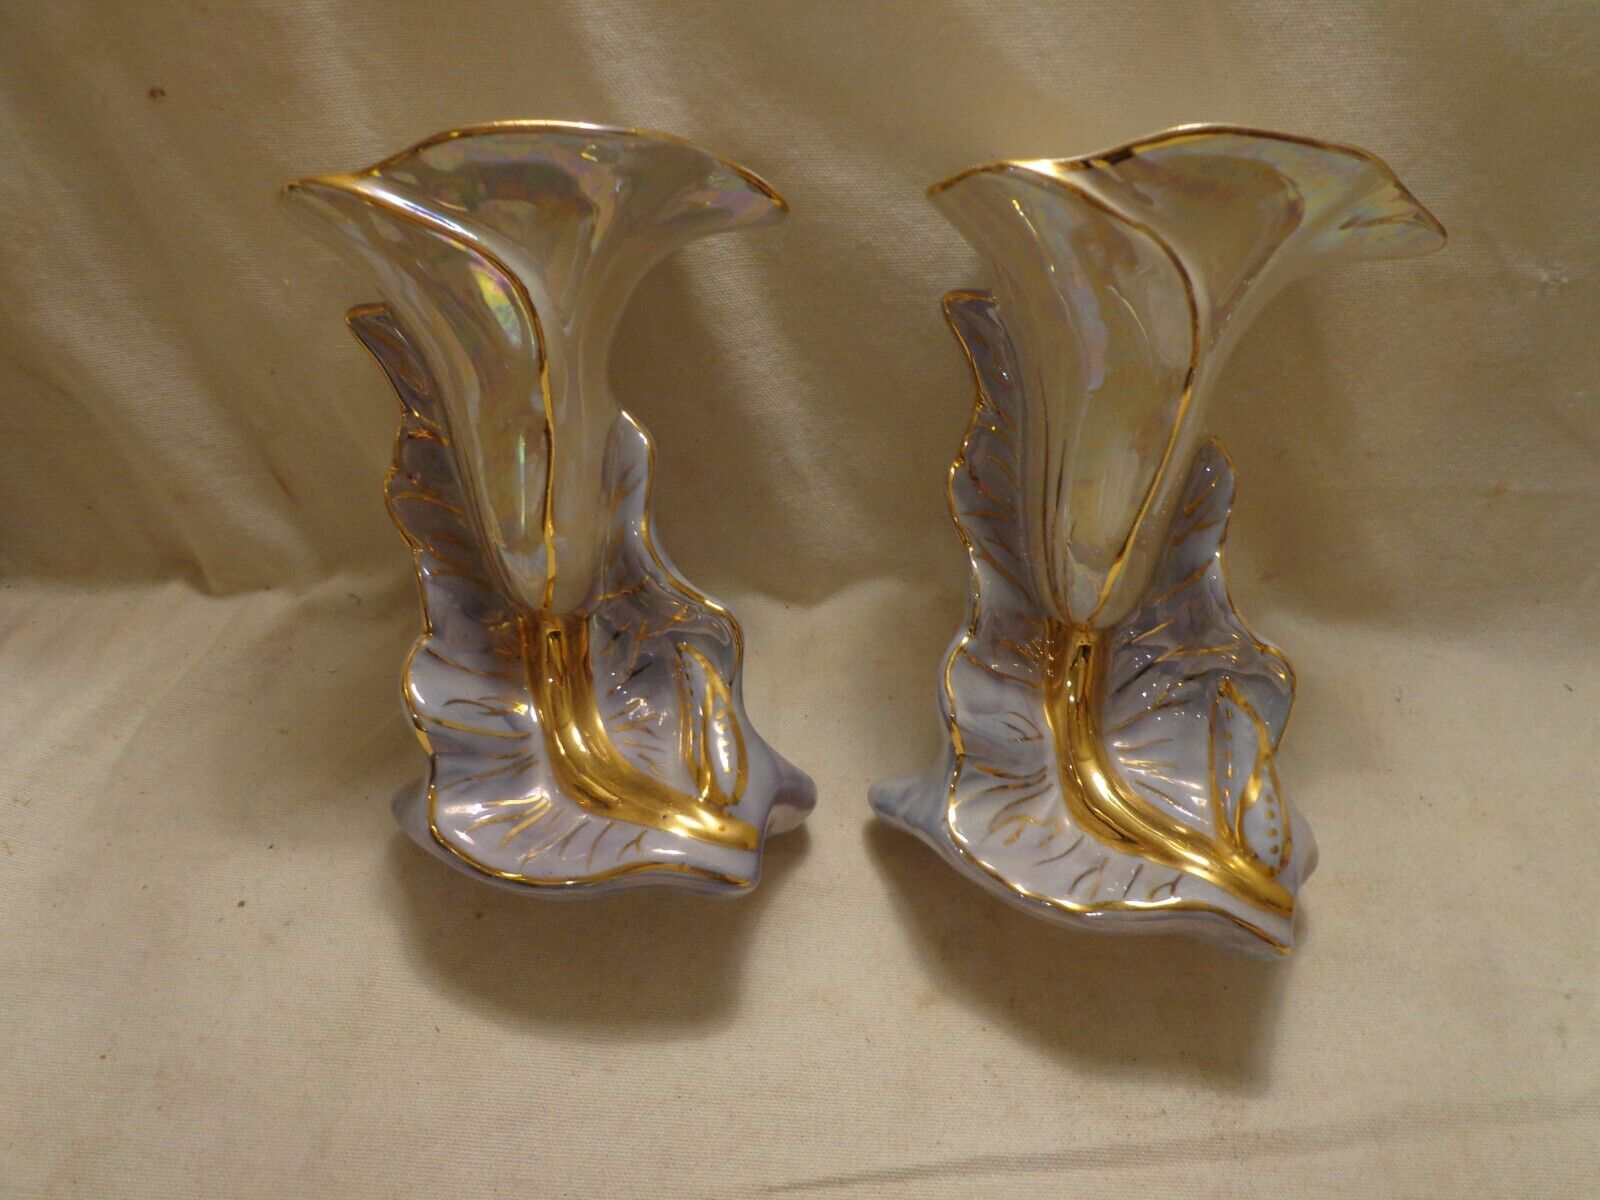 KASS USA LILY VASE PAIR NICE COLOR MID CENTURY TABLE DECOR IRRIDESCENT PORCELAIN